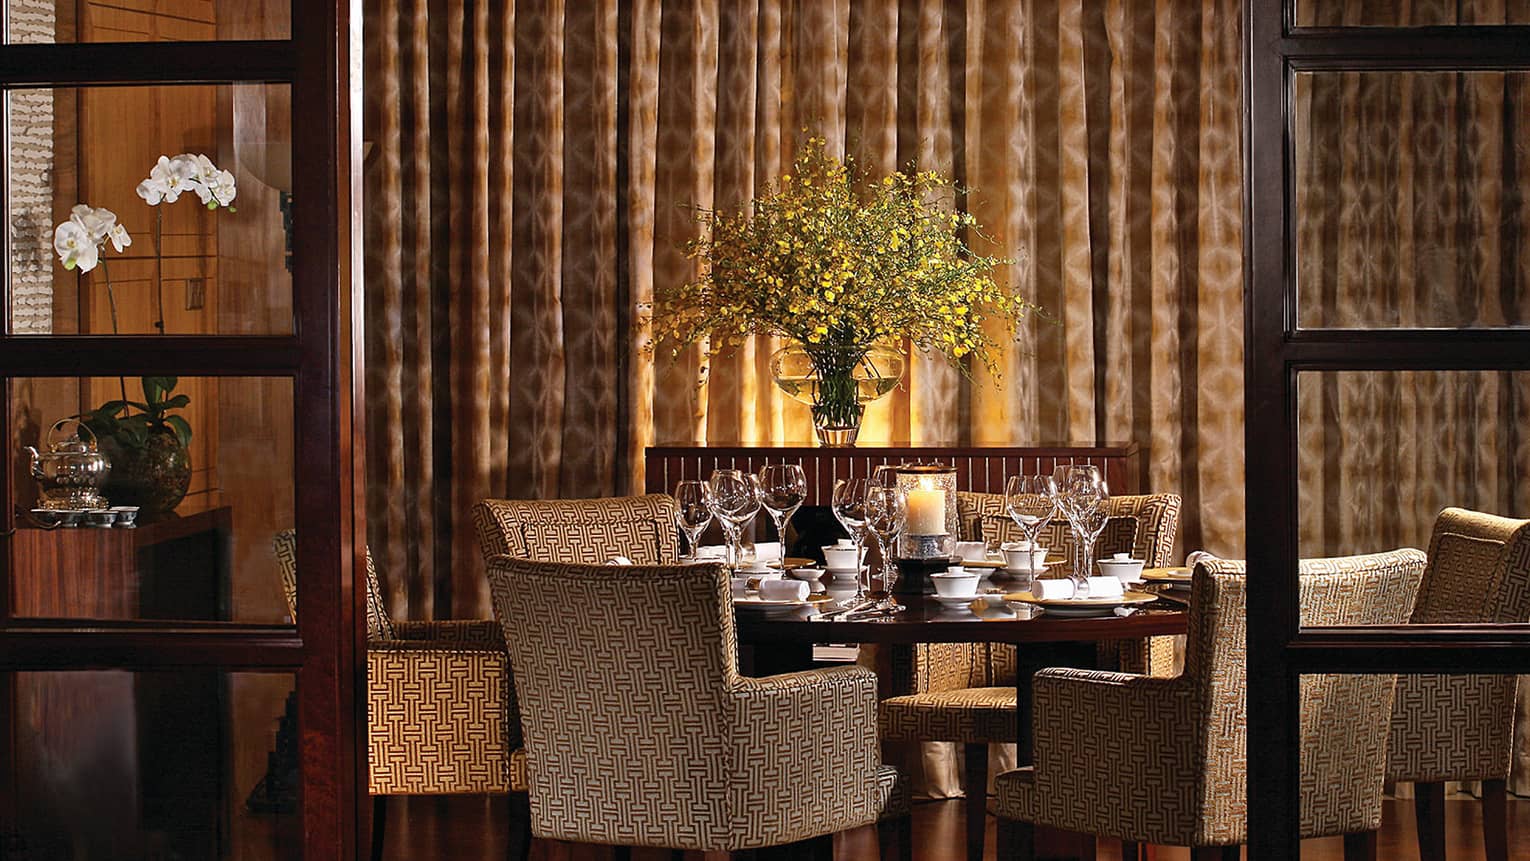 Upholstered dining chairs around wood table in dimly-lit dining area by wall, curtains